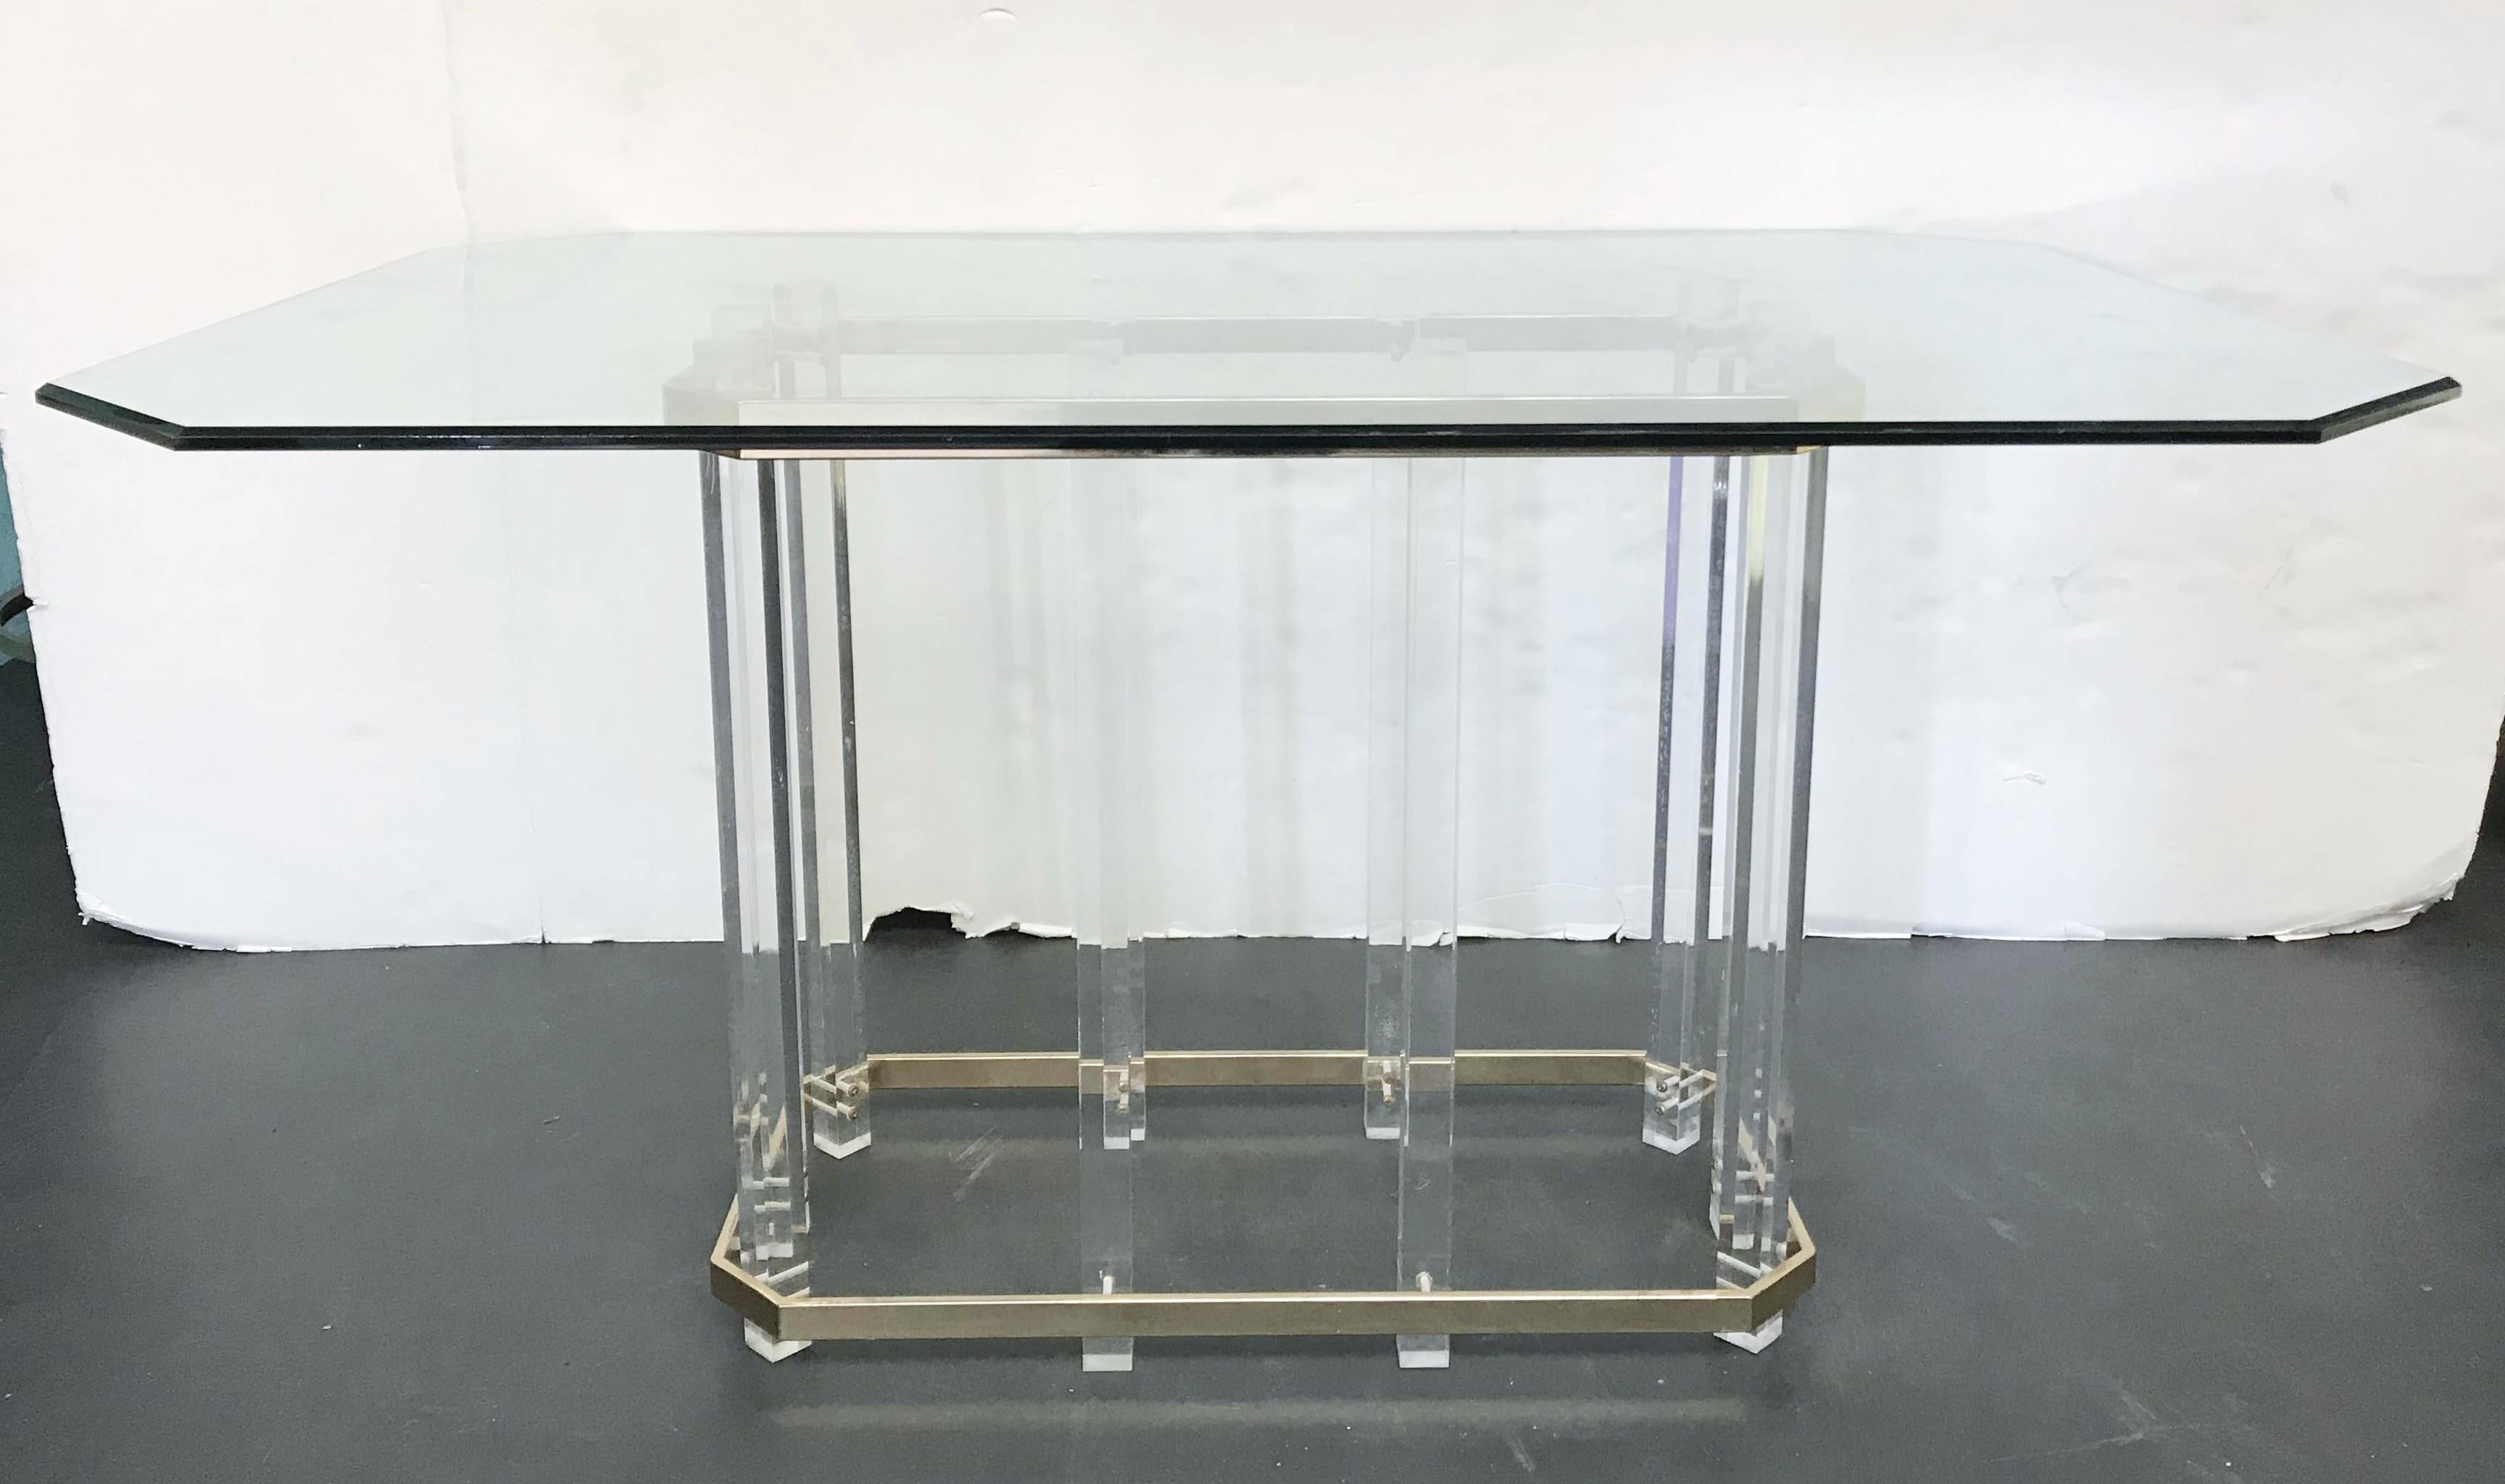 Vintage midcentury dining table with ten acrylic Lucite pillars wrapped around by two polished brass bars supporting a large geometric beveled glass top mimicking the form of the table base, designed by Charles Hollis Jones, made in the USA, circa